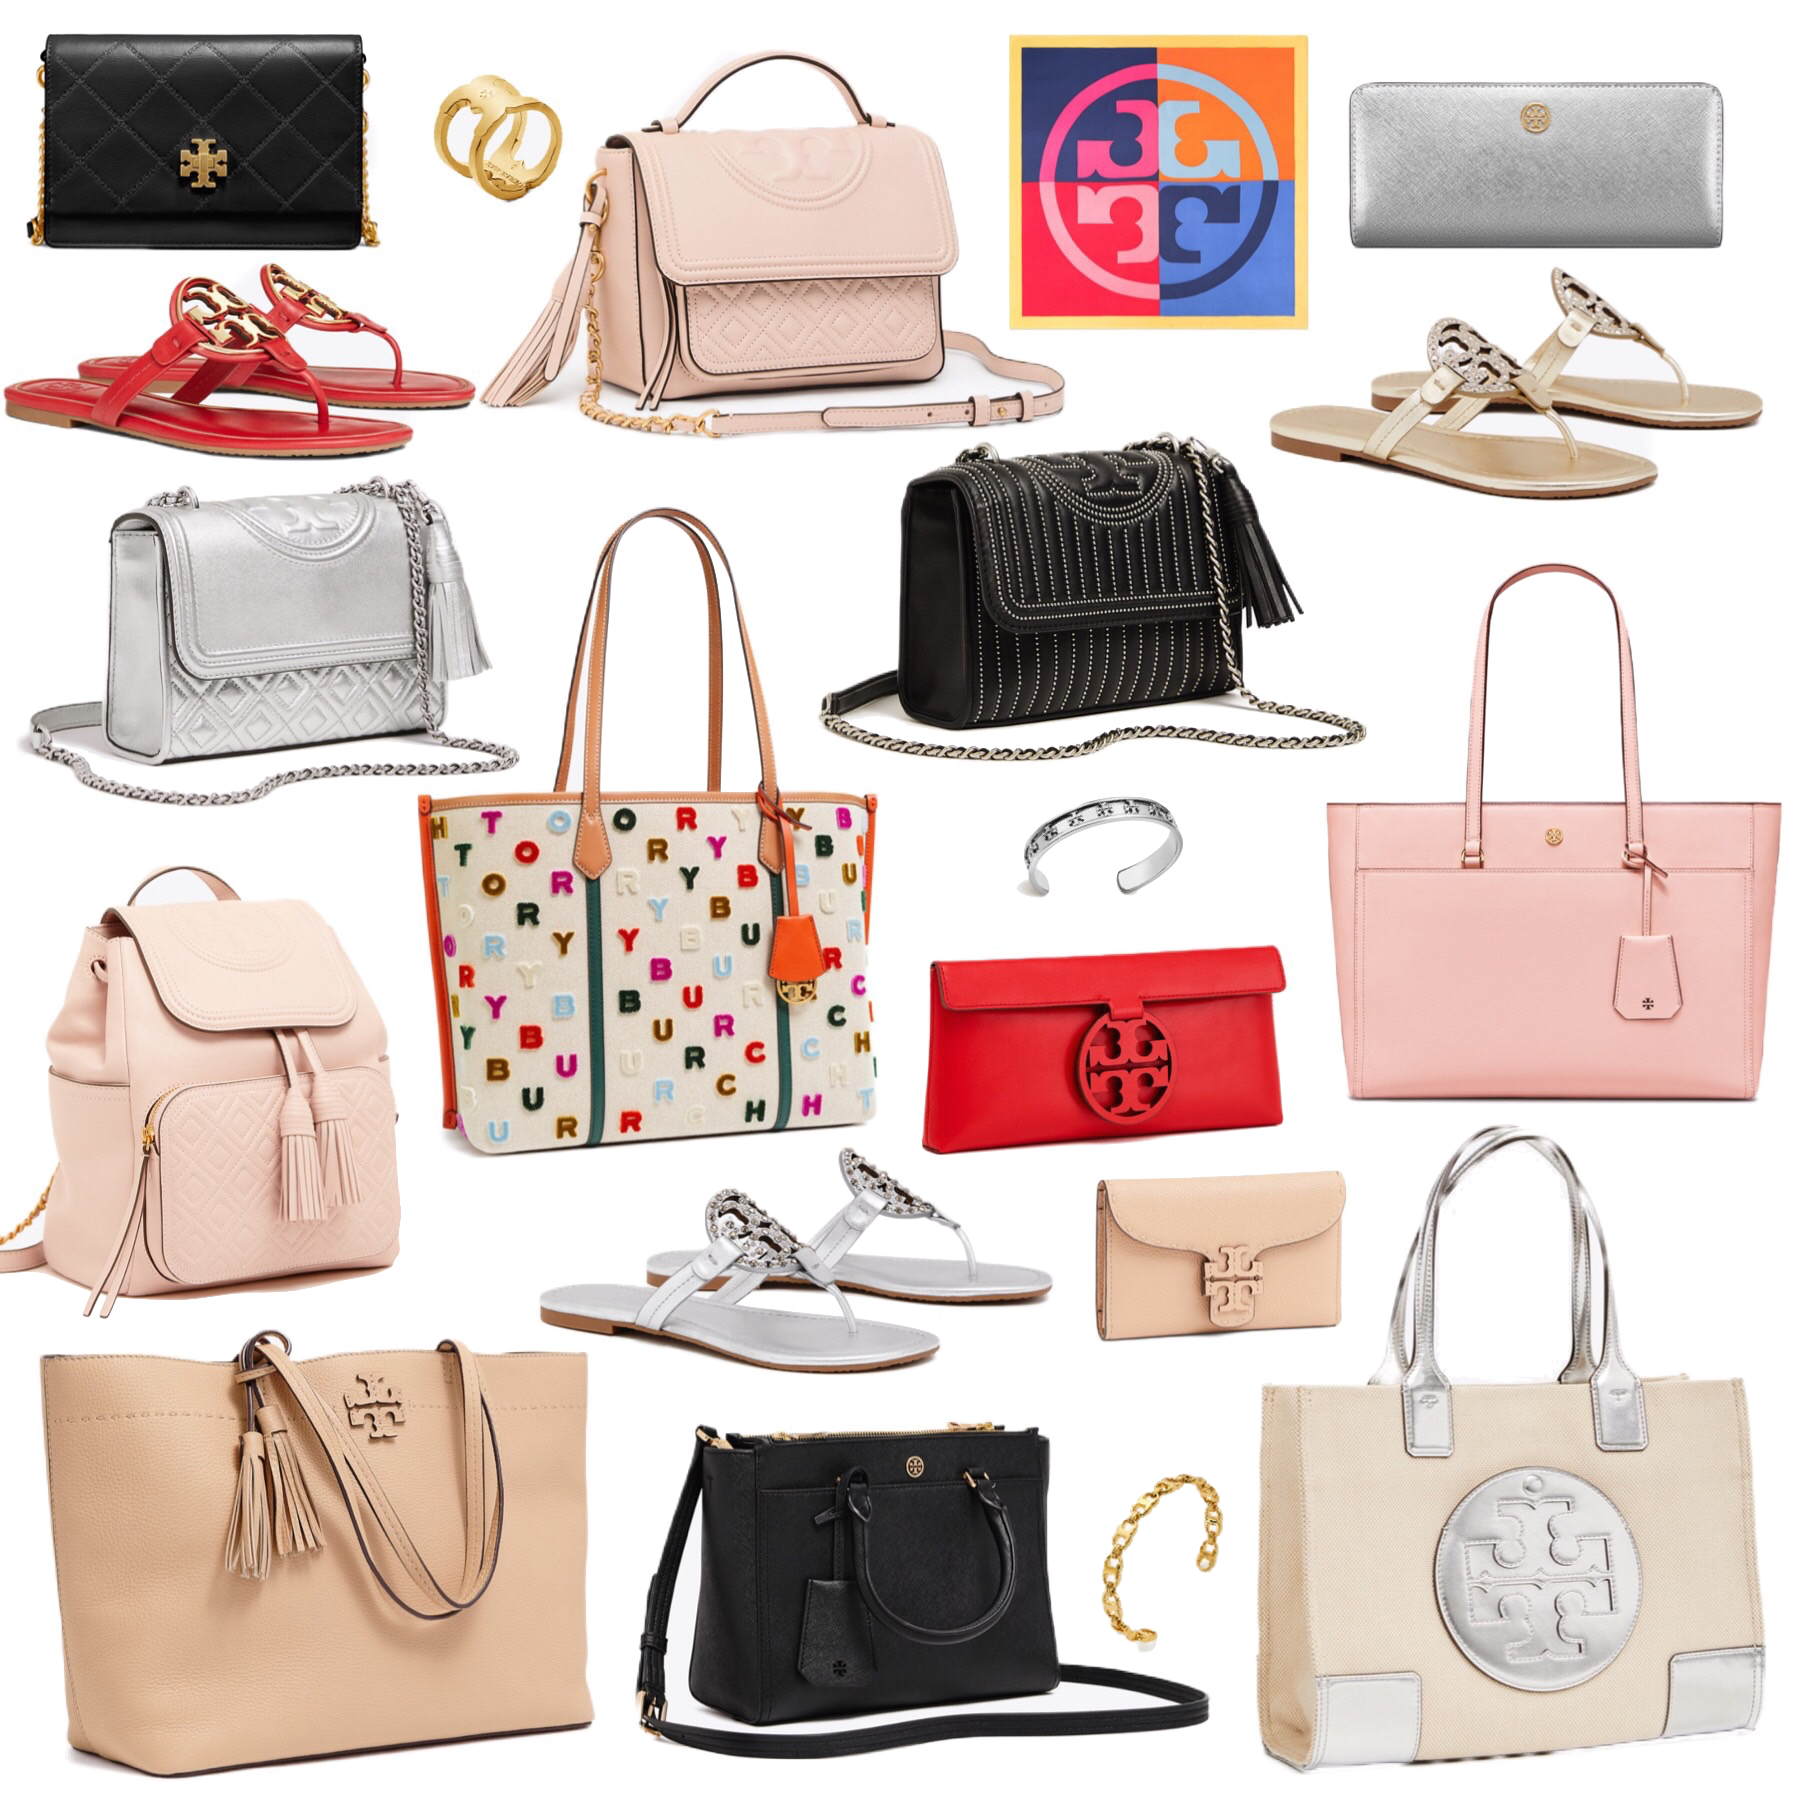 Nordstrom Anniversary Sale 2021: Grab a Tory Burch purse on sale right now